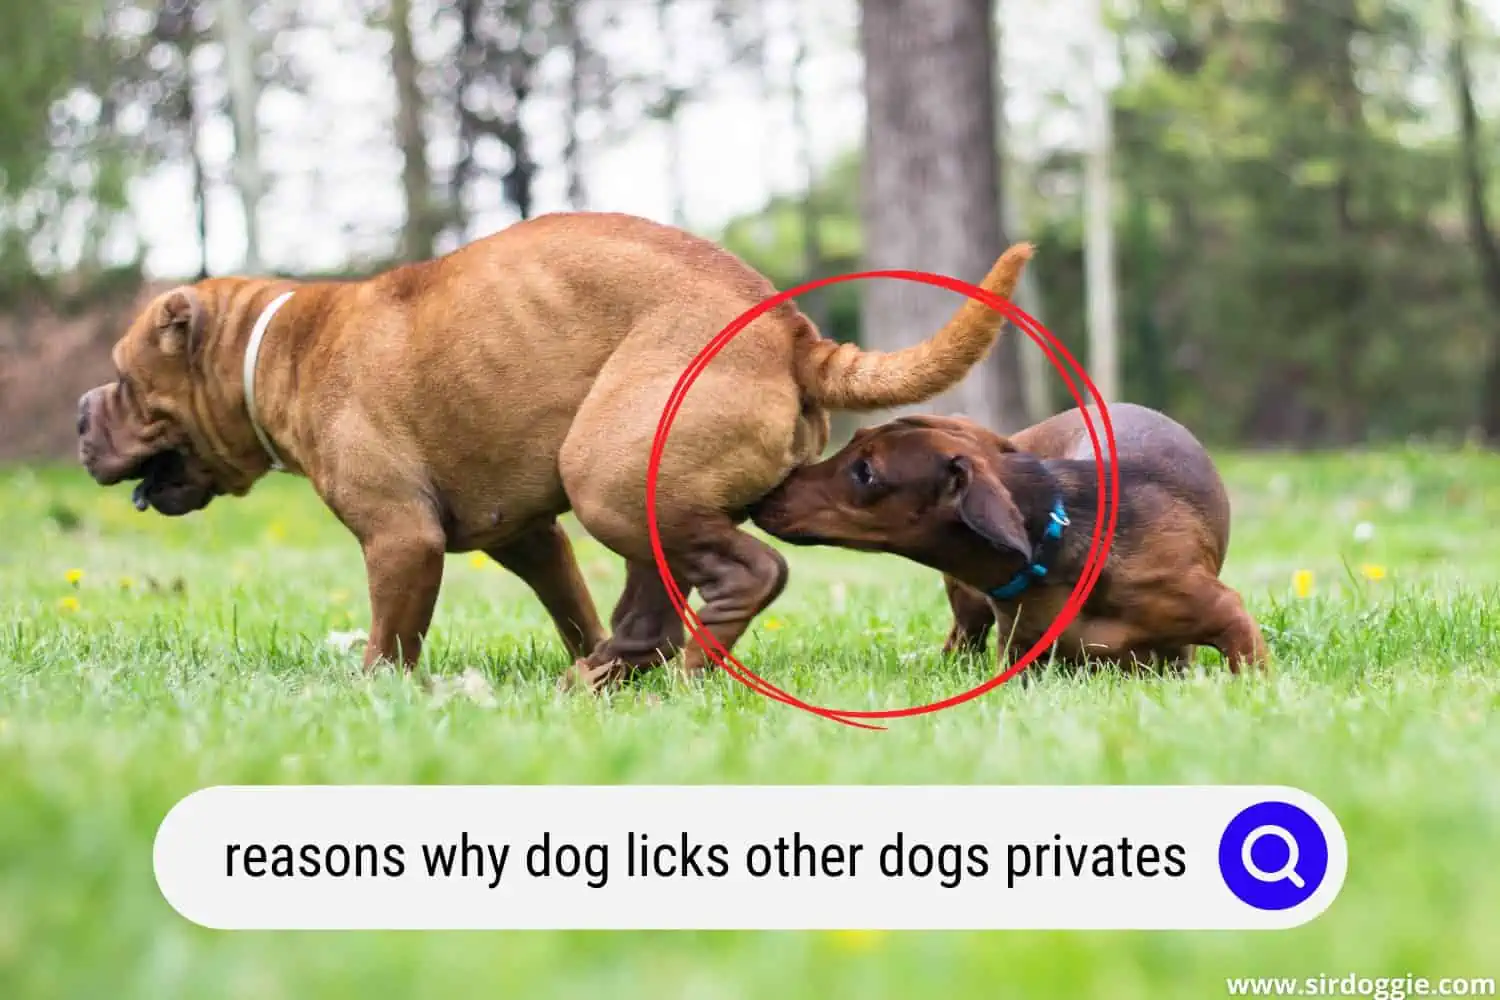 common reasons dogs lick other dogs privates